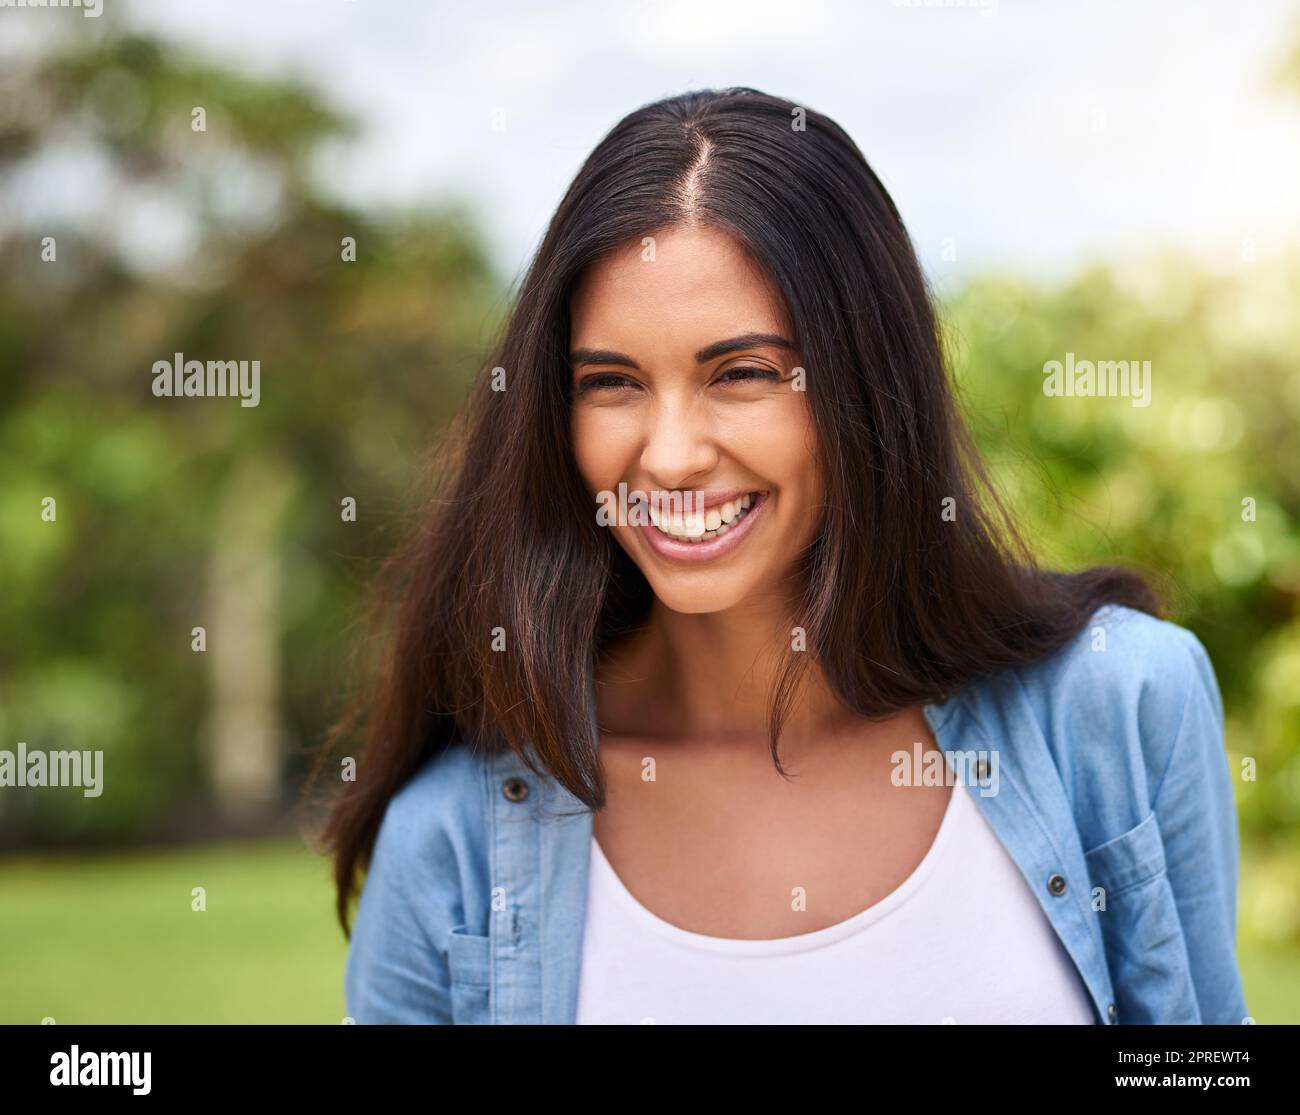 She smiles because shes happy. an attractive young woman standing outdoors. Stock Photo